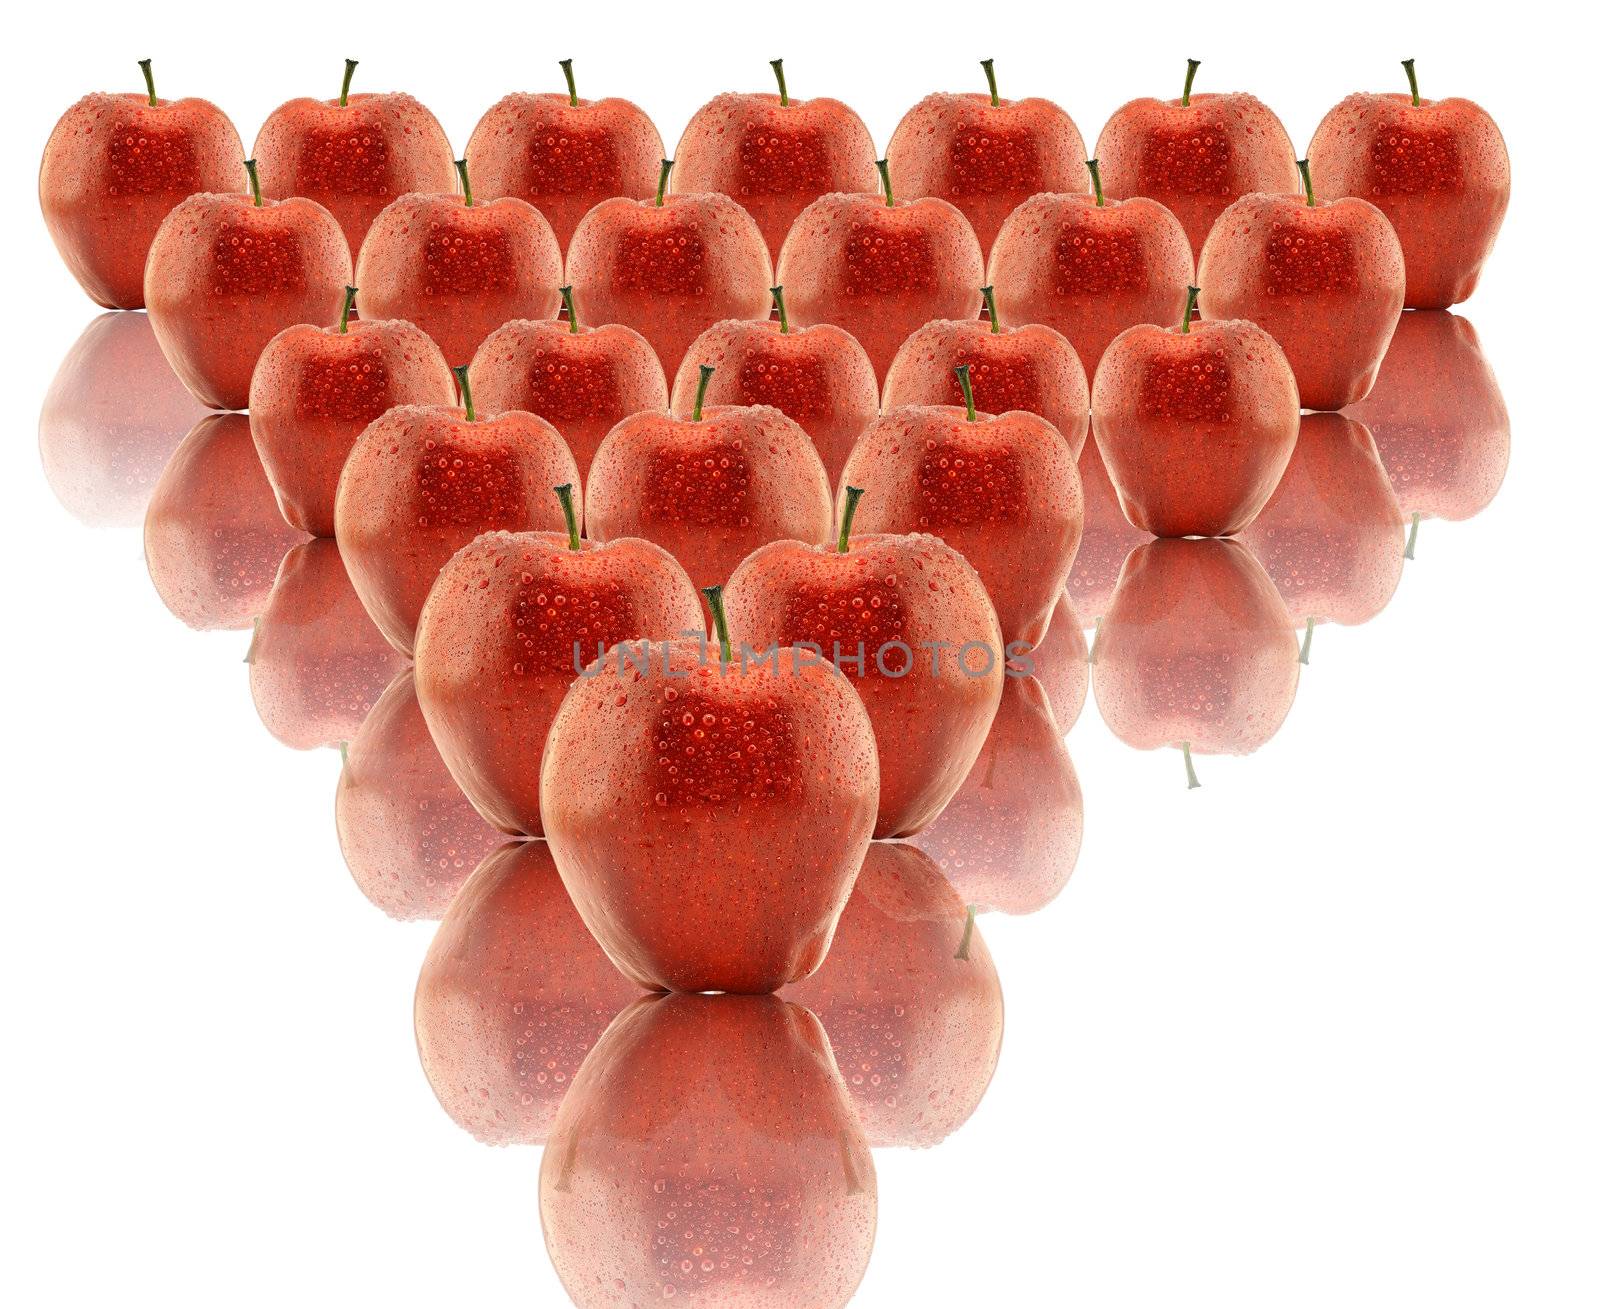 large group of red apples in a row. Horizontal shape by sommai